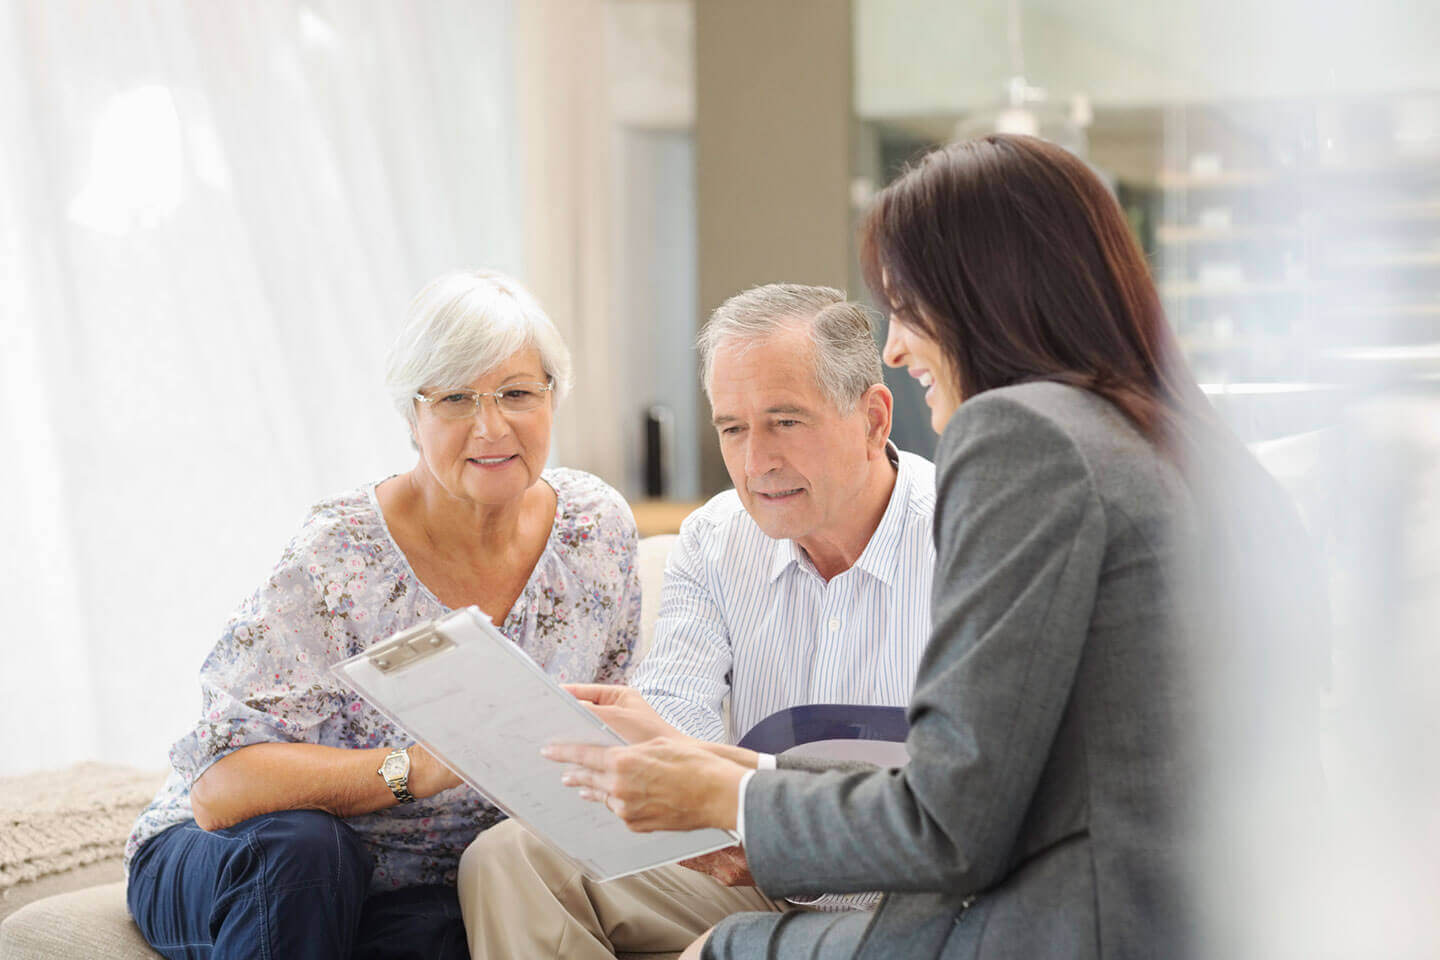 A advisor supporting an elderly couple through legal processes